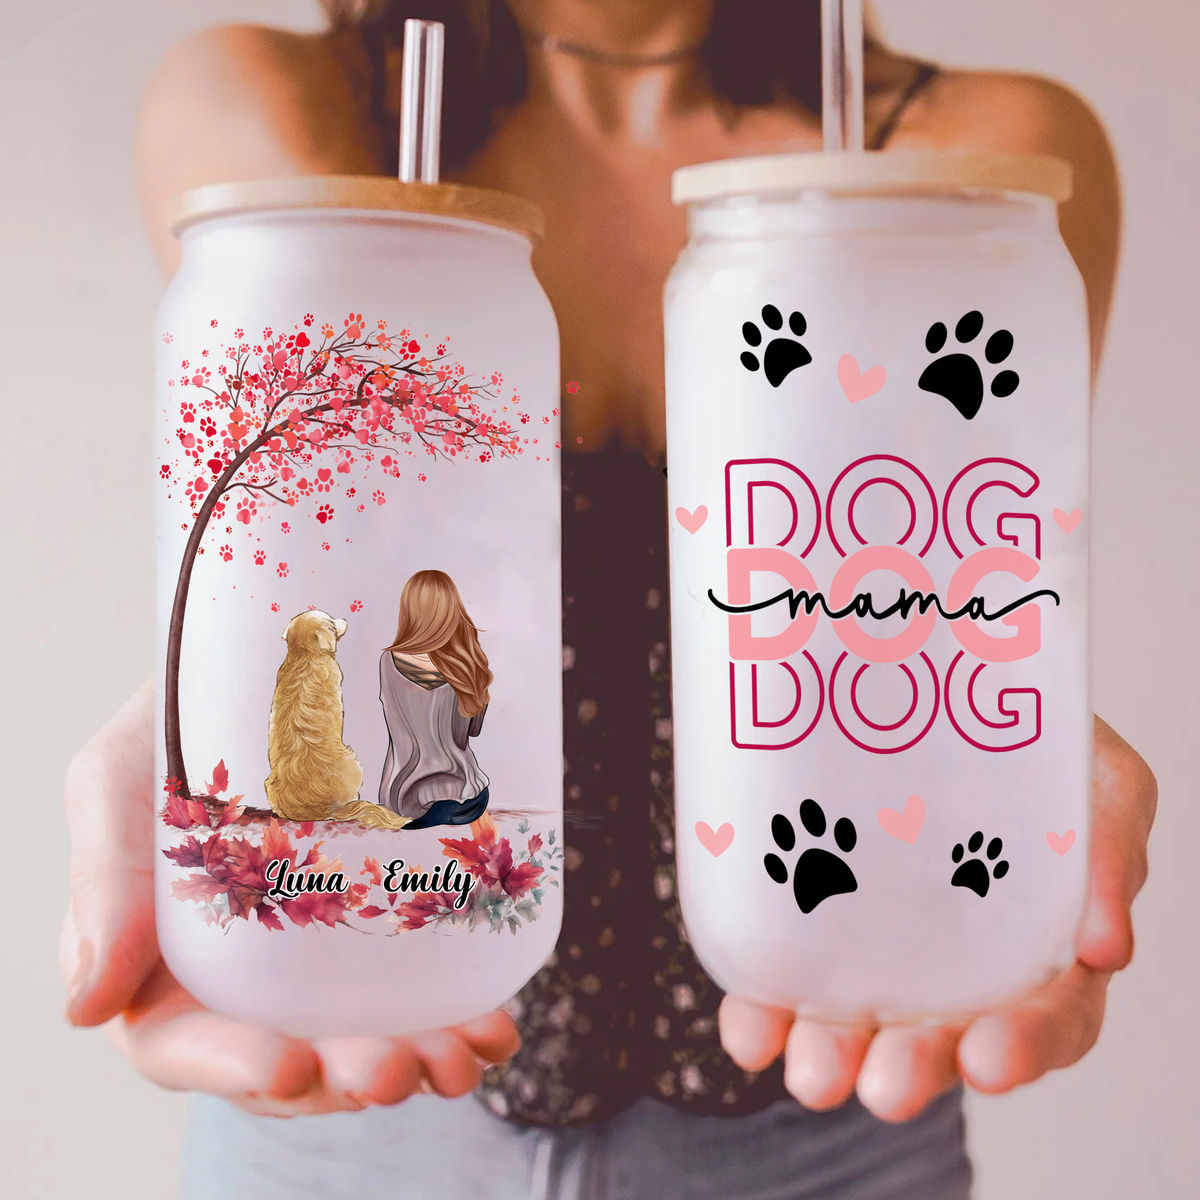 Cute Glass Tumbler With Glass Dog, Dog Glass Cup, Water Cup, Drink Glass,  Handmade Glassware, Glassware Set, Holiday Glasses, Handmade Dog -   Israel